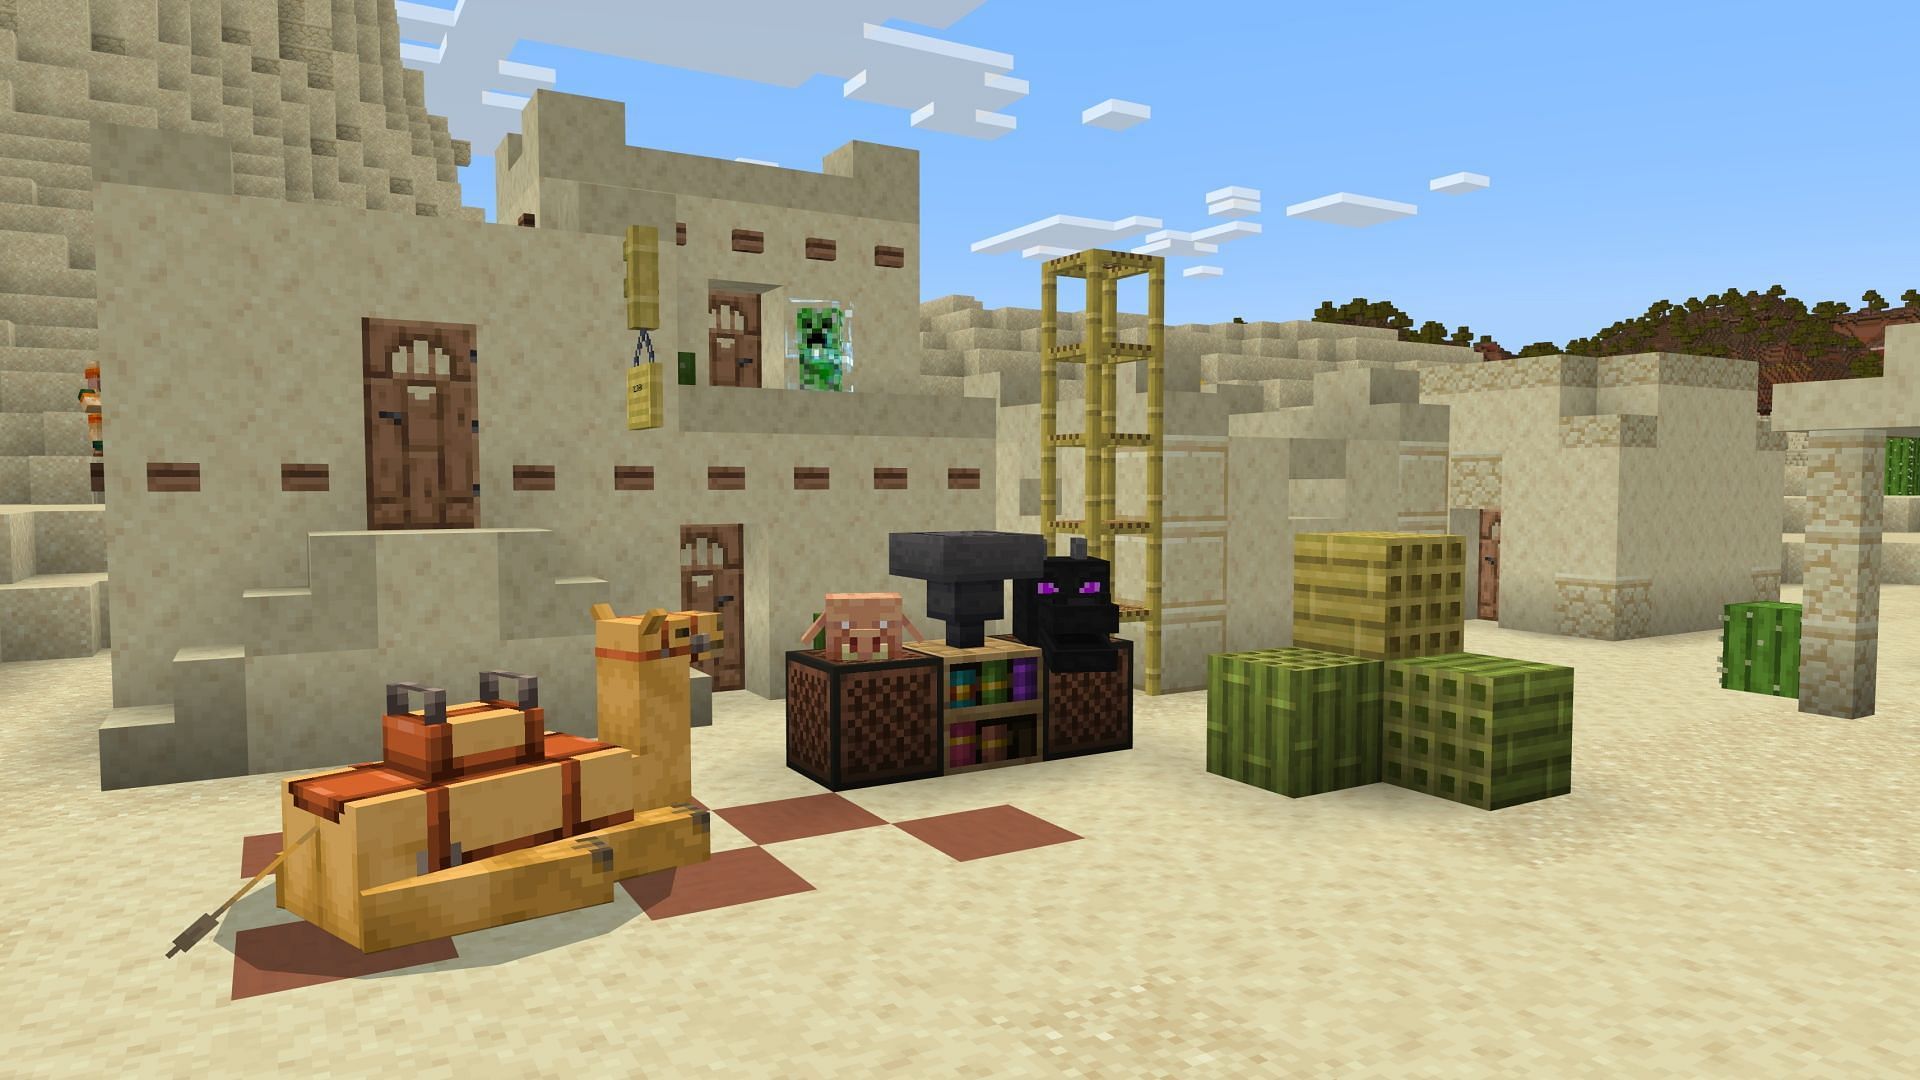 Mojang has released a new Minecraft: Bedrock Edition preview showcasing new features (Image via Mojang)